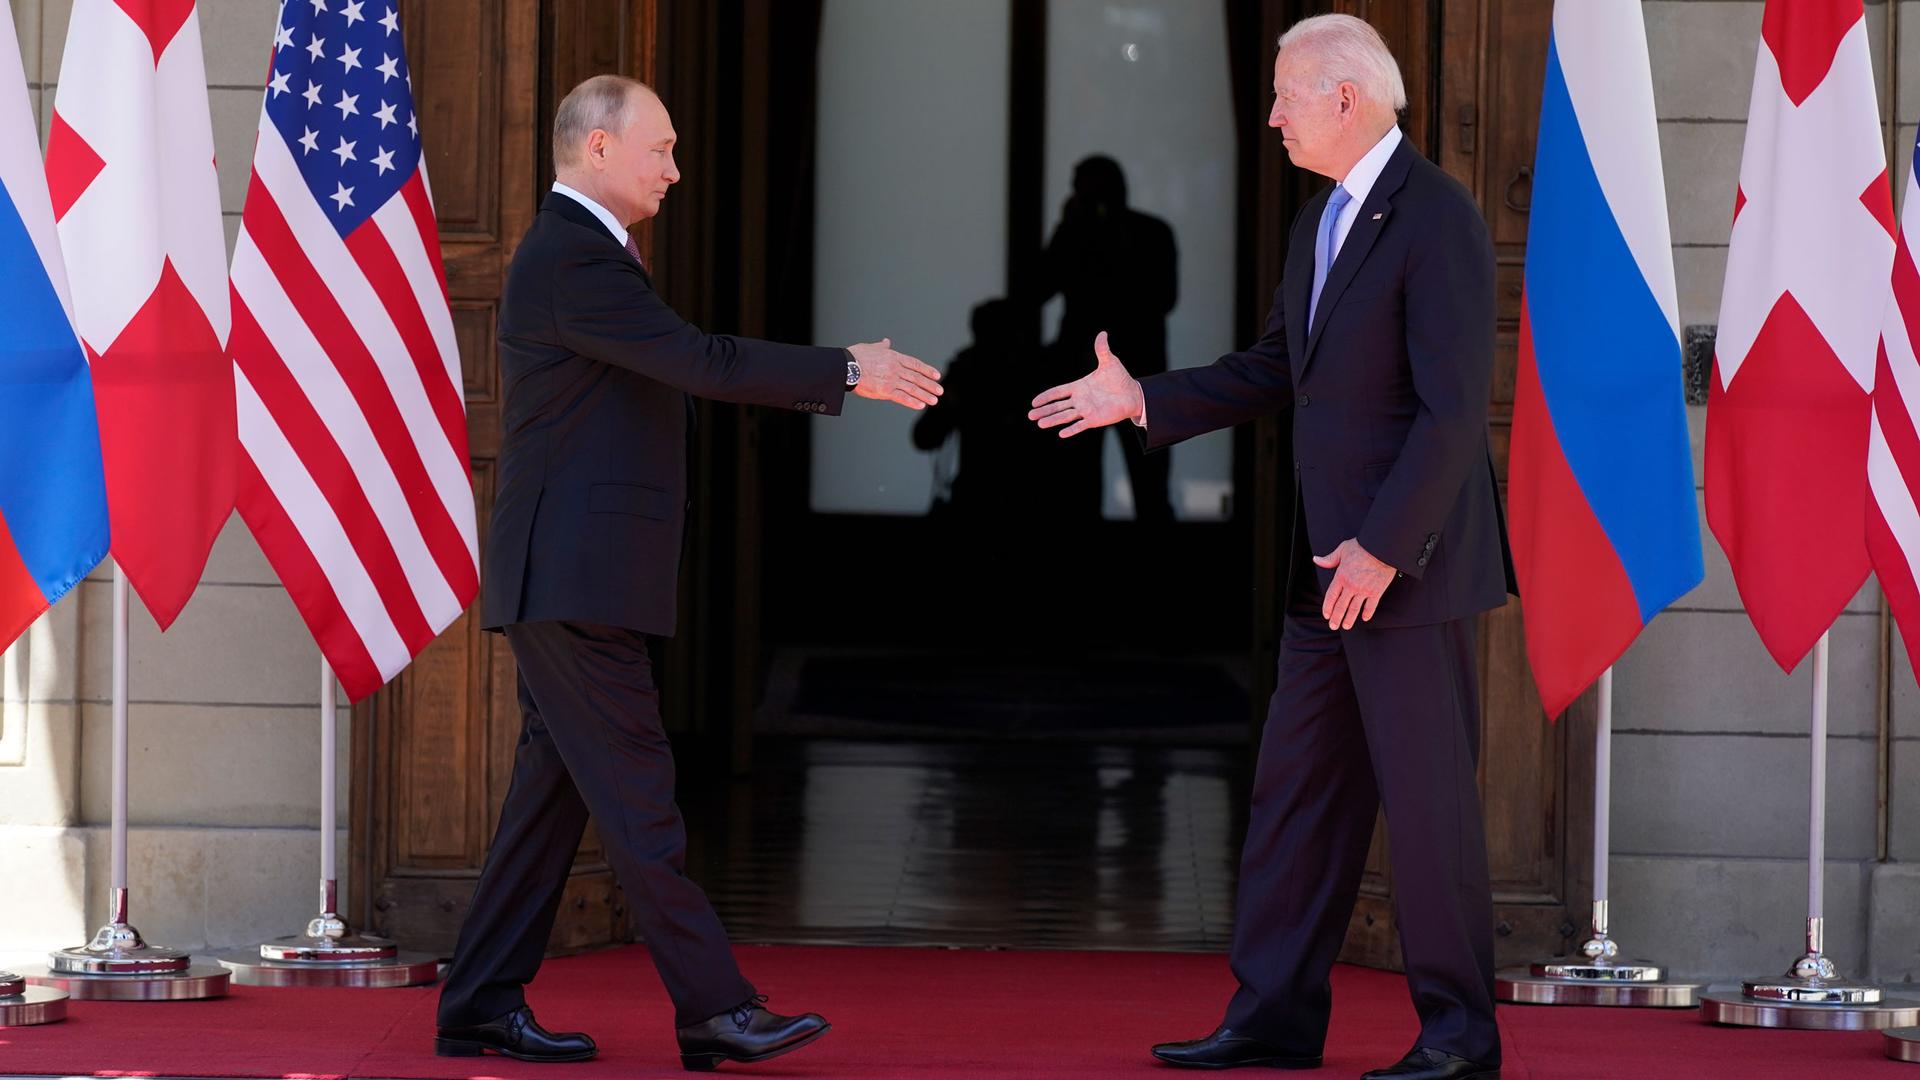 President Joe Biden and Russian President Vladimir Putin are shown walking toward each other with their hands outstretched for a shake.